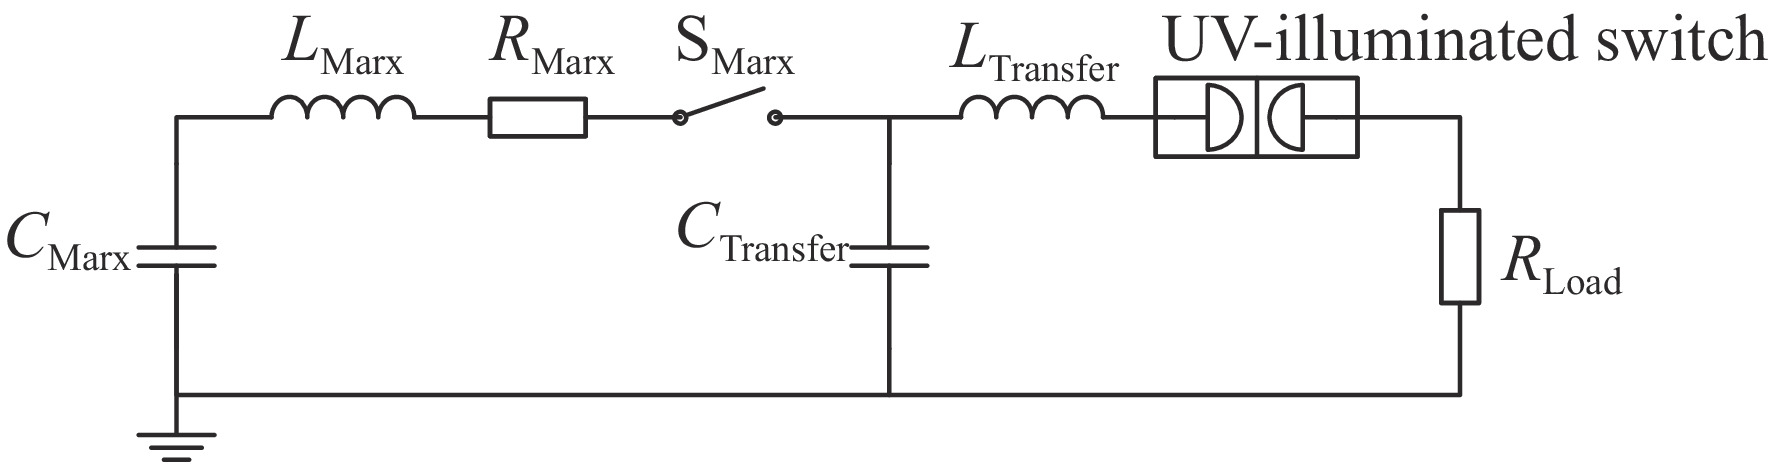 An equivalent circuit of the experimental platform